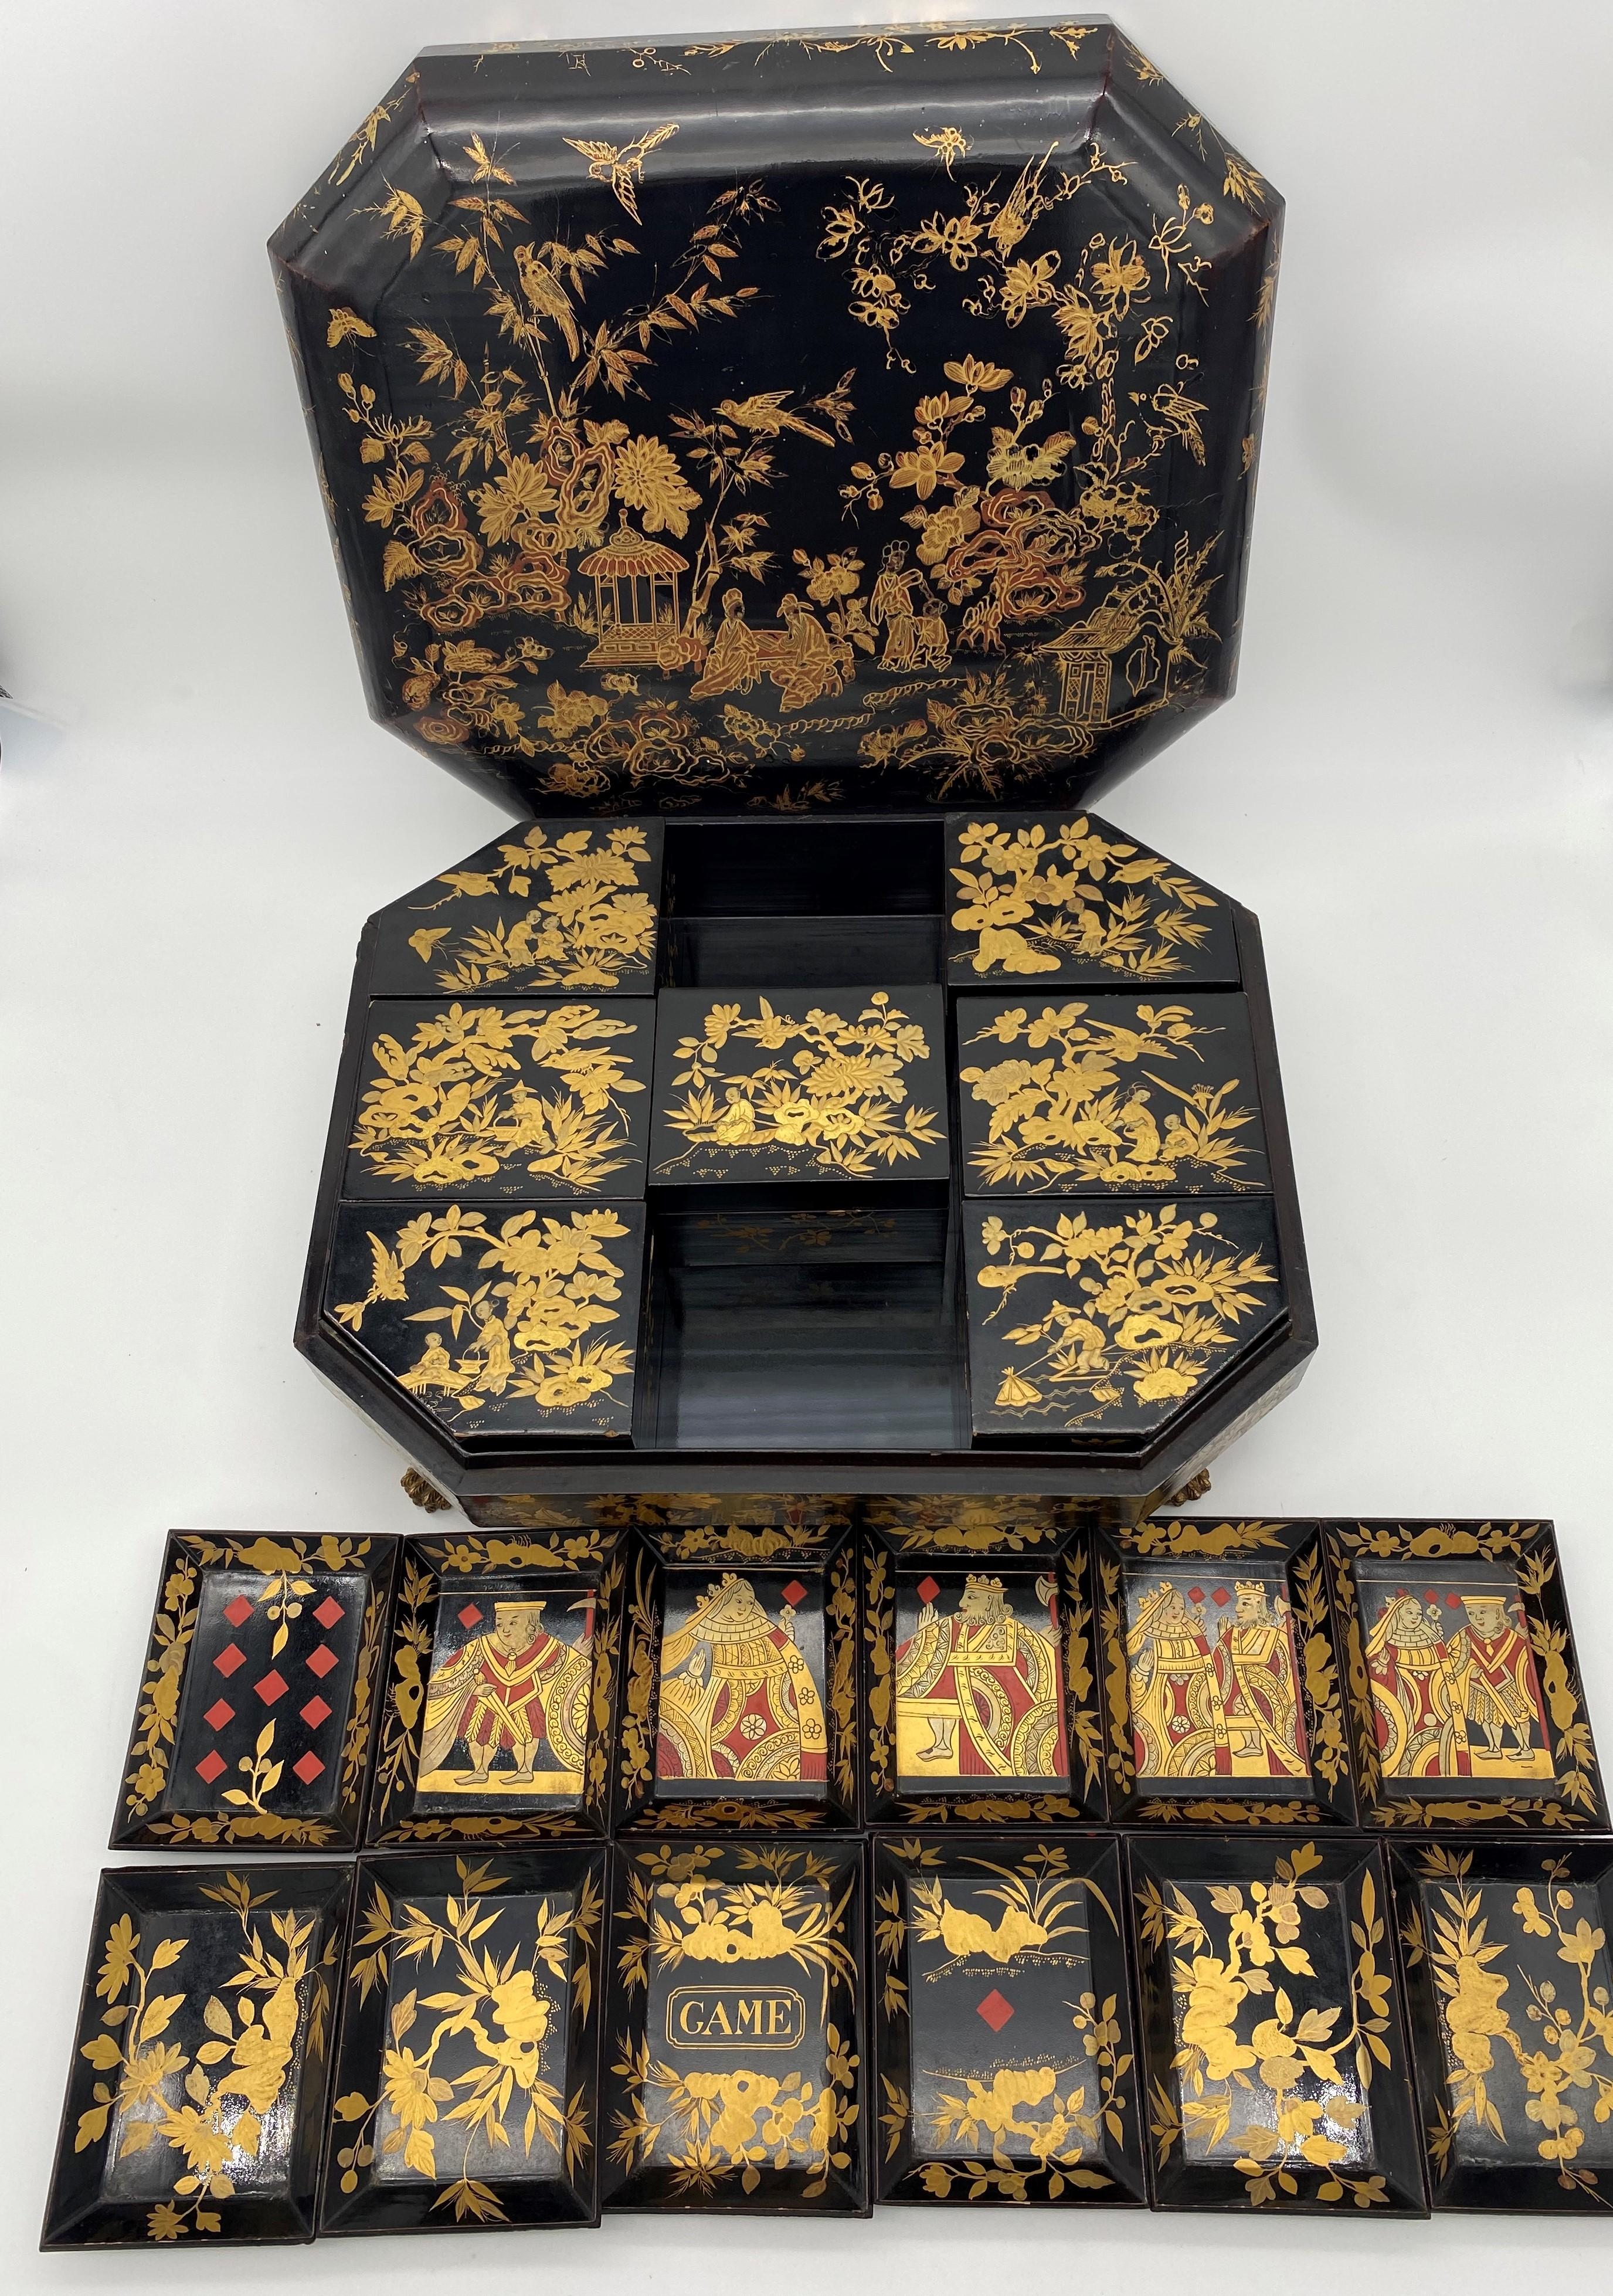 Antique 18th Century Export Chinese Lacquer Gaming Box In Good Condition For Sale In Brea, CA